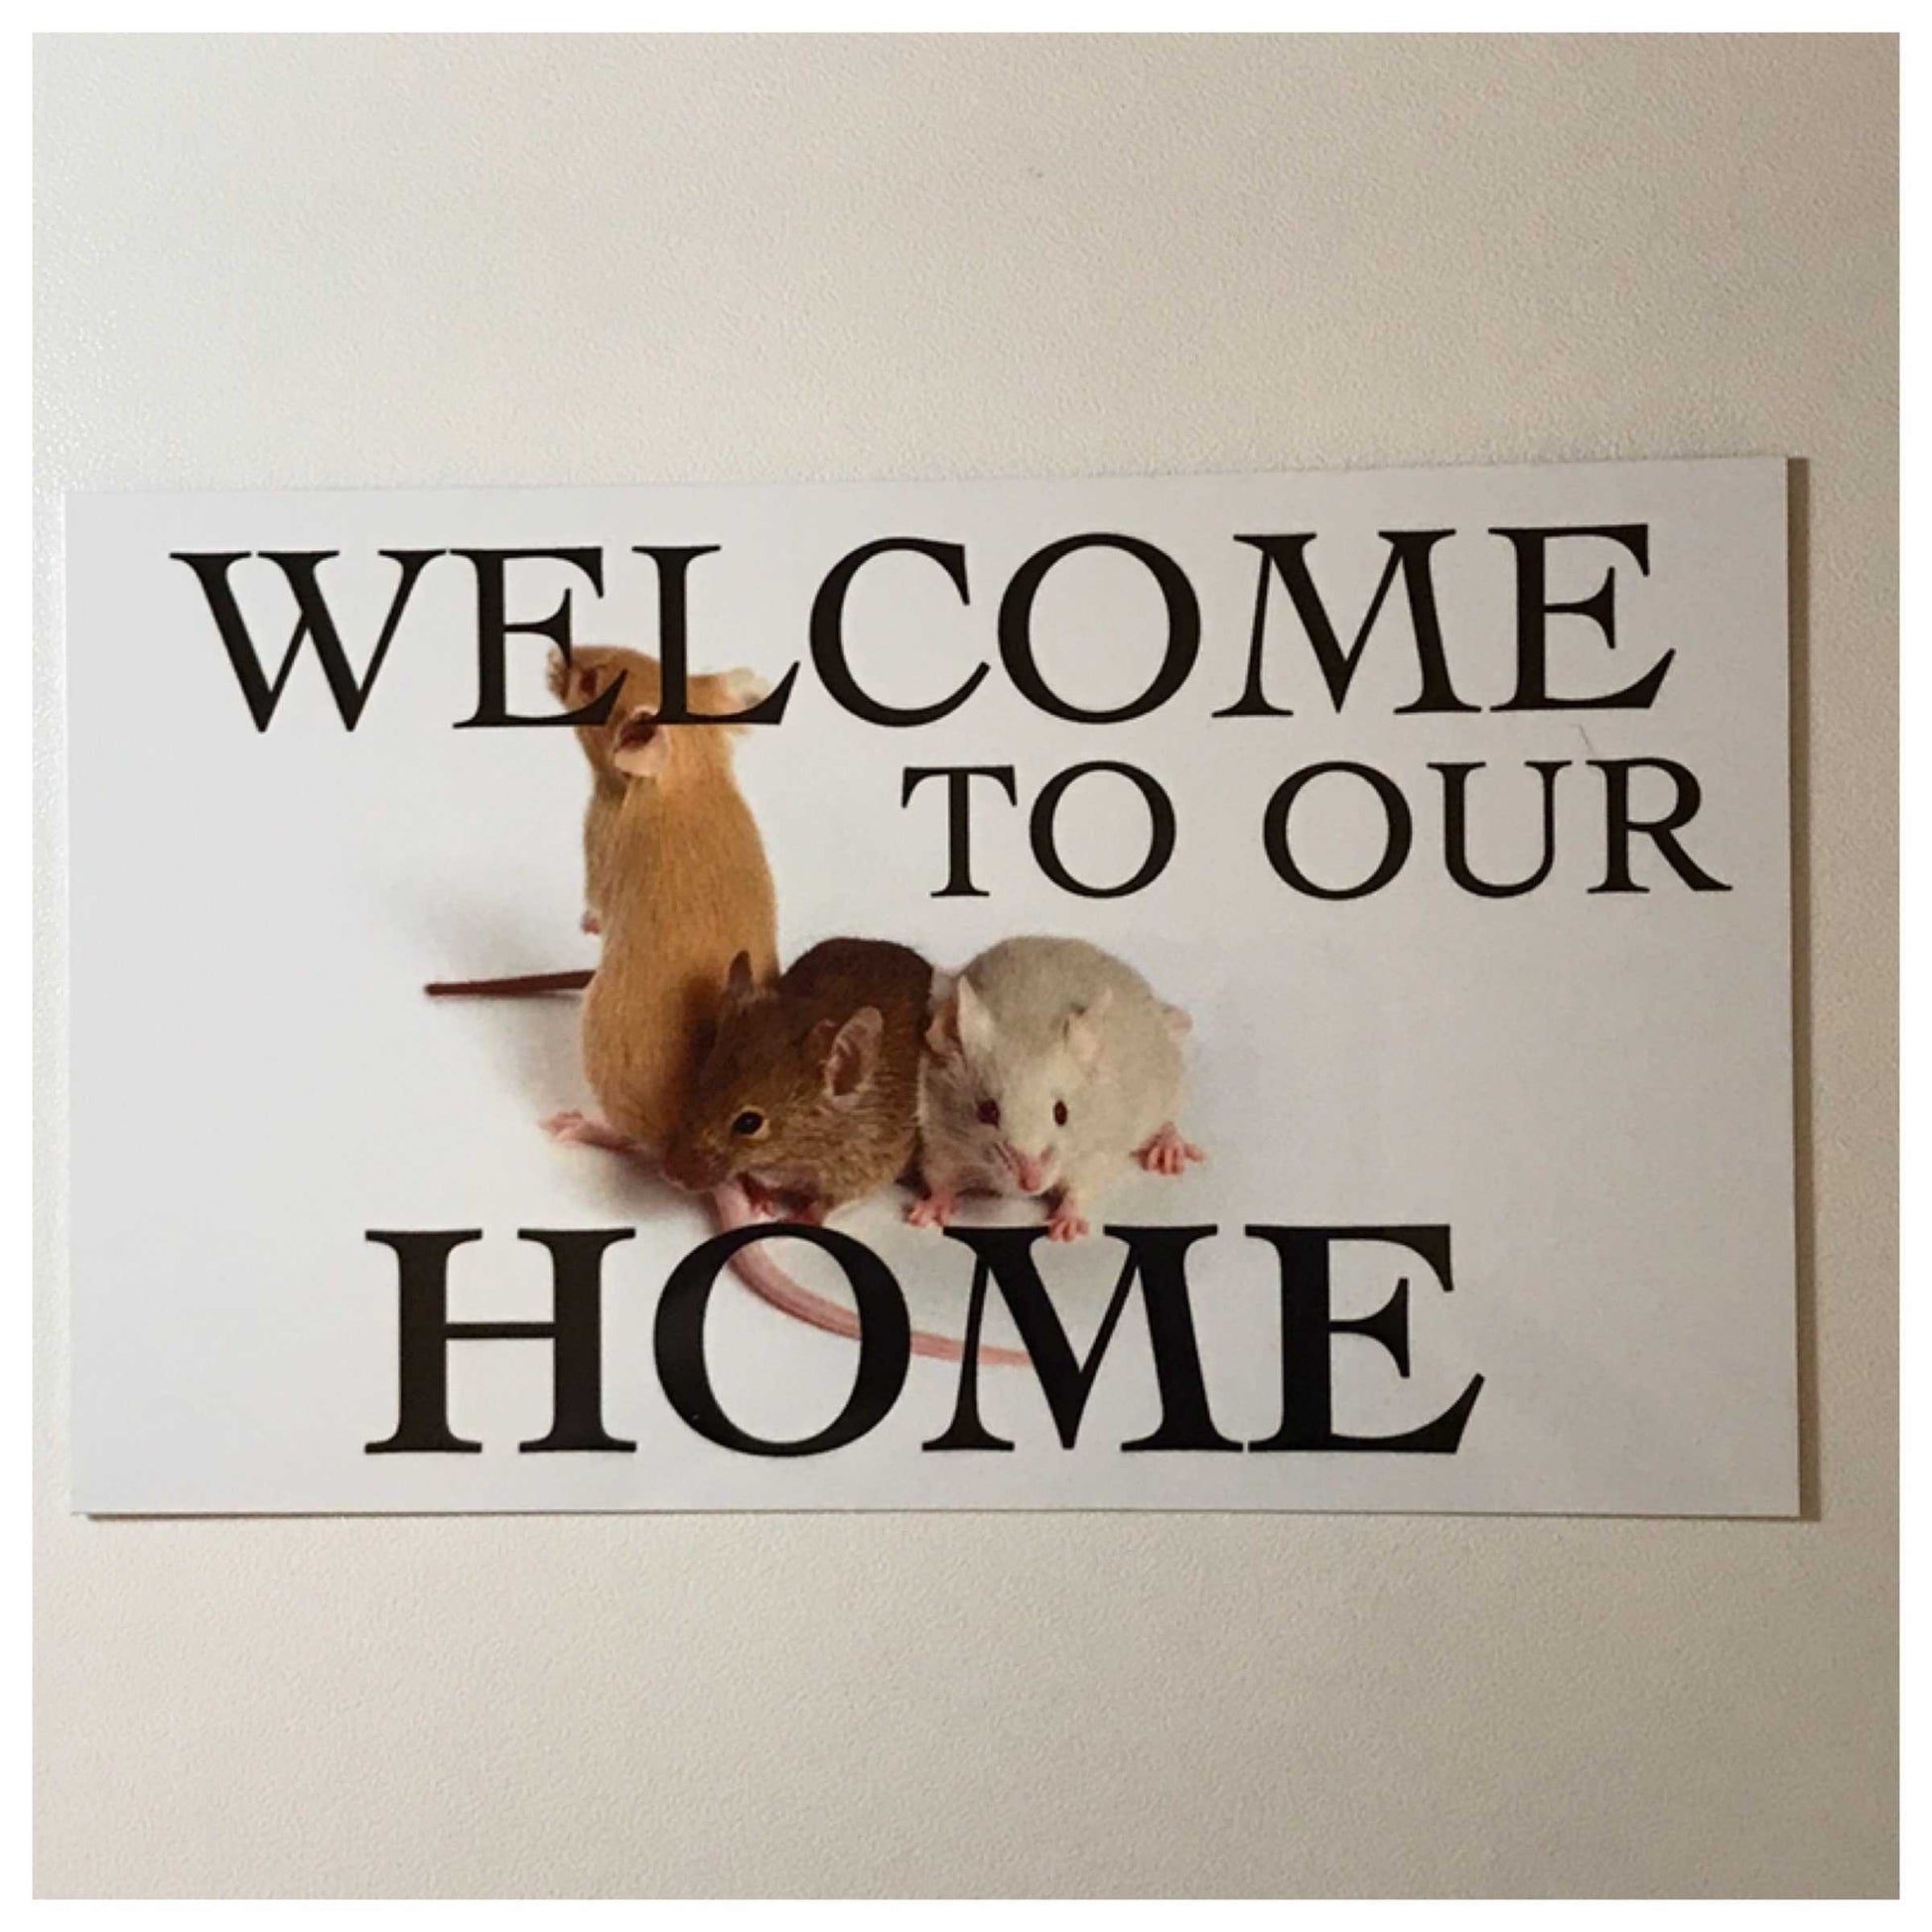 Mouse Mice Welcome To Our Home Sign